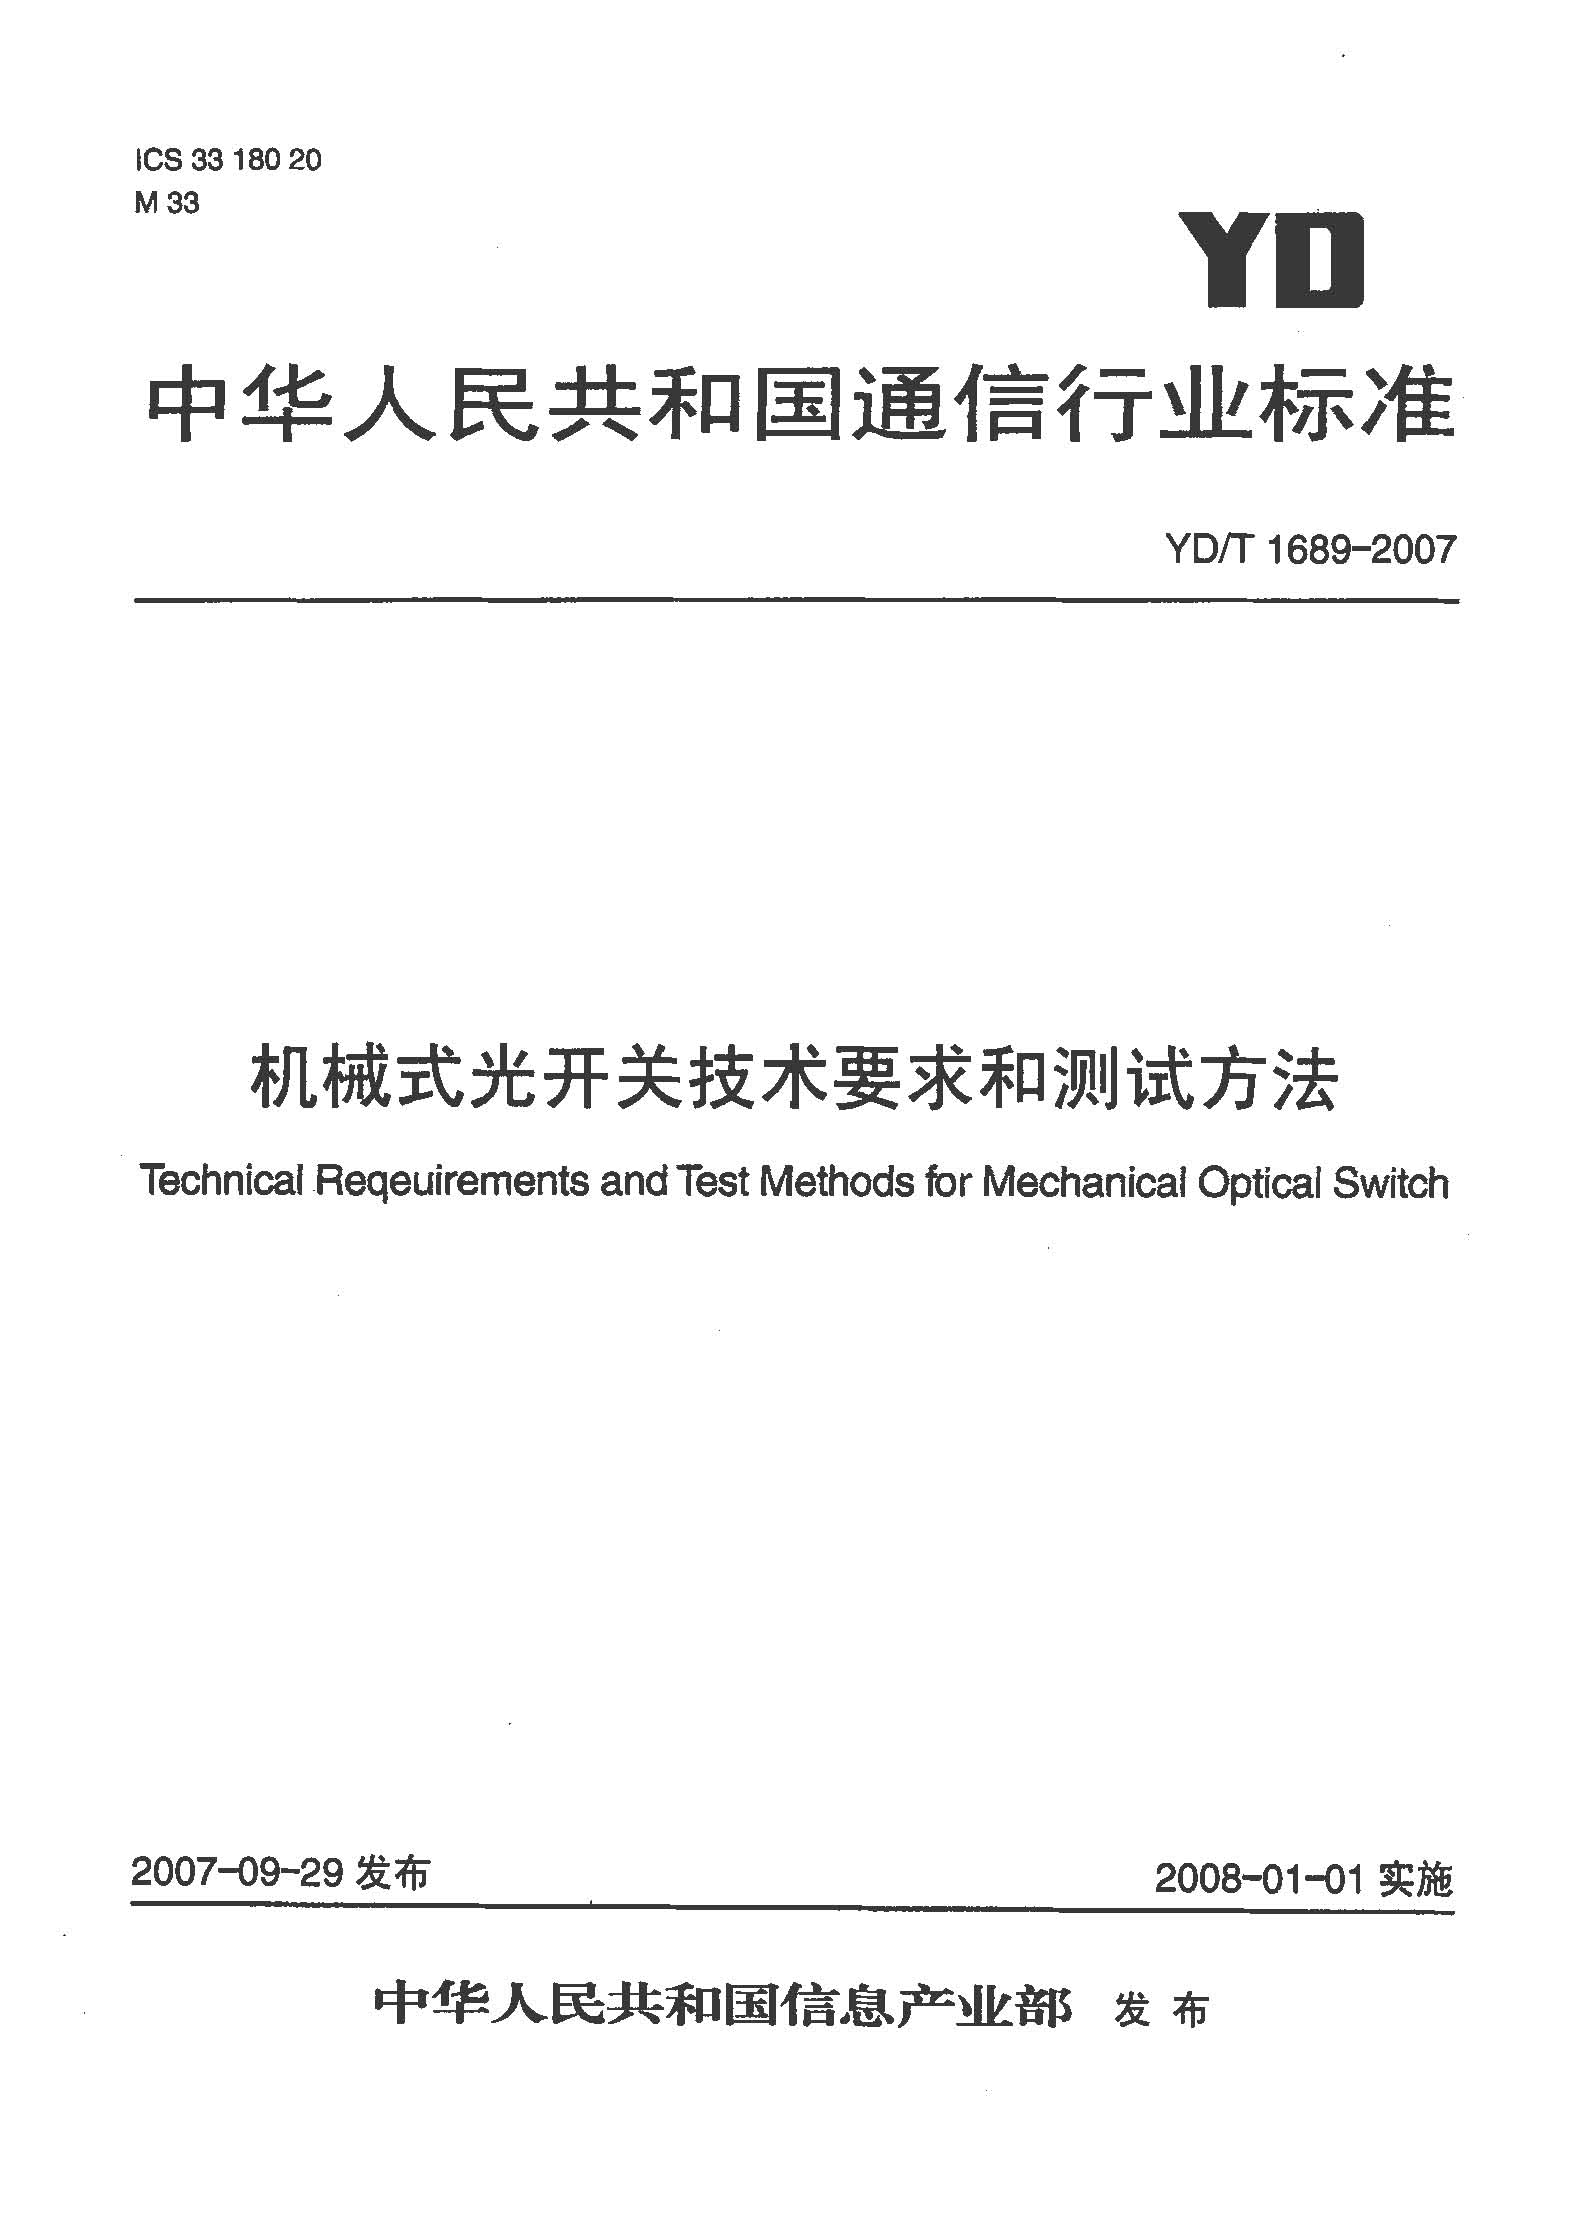 Mechanical Optical switch standard - People's Republic of China